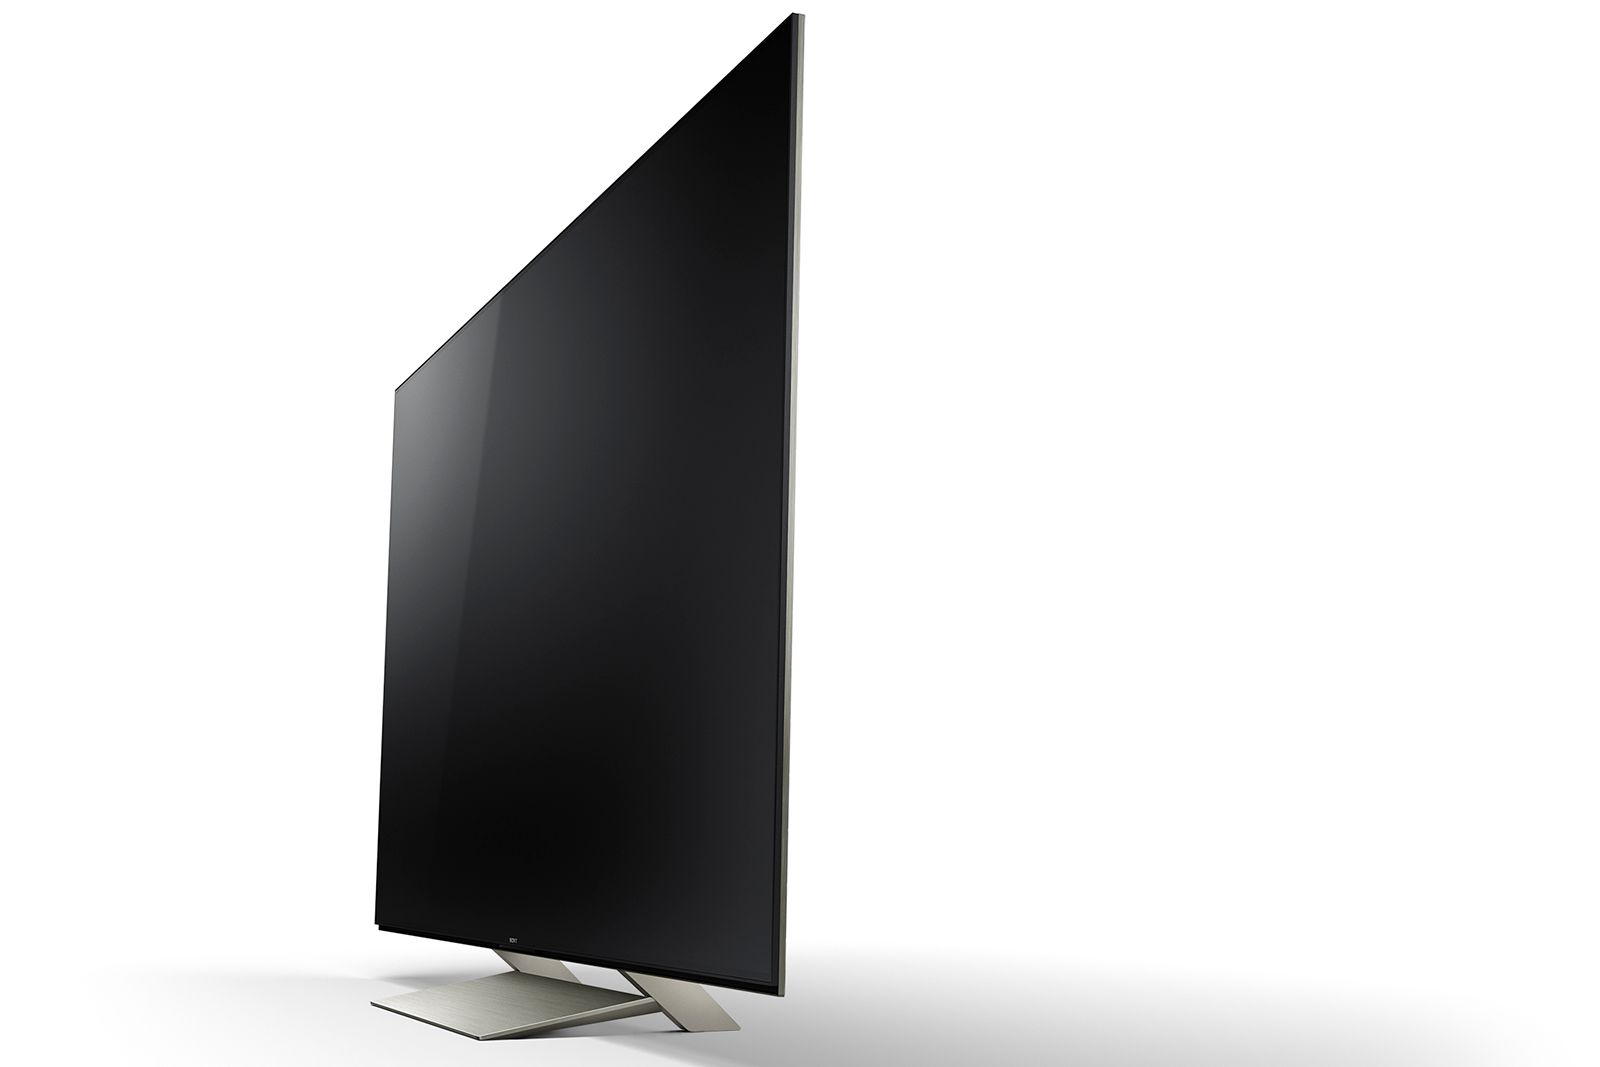 sony xe93 4k tv review image 9